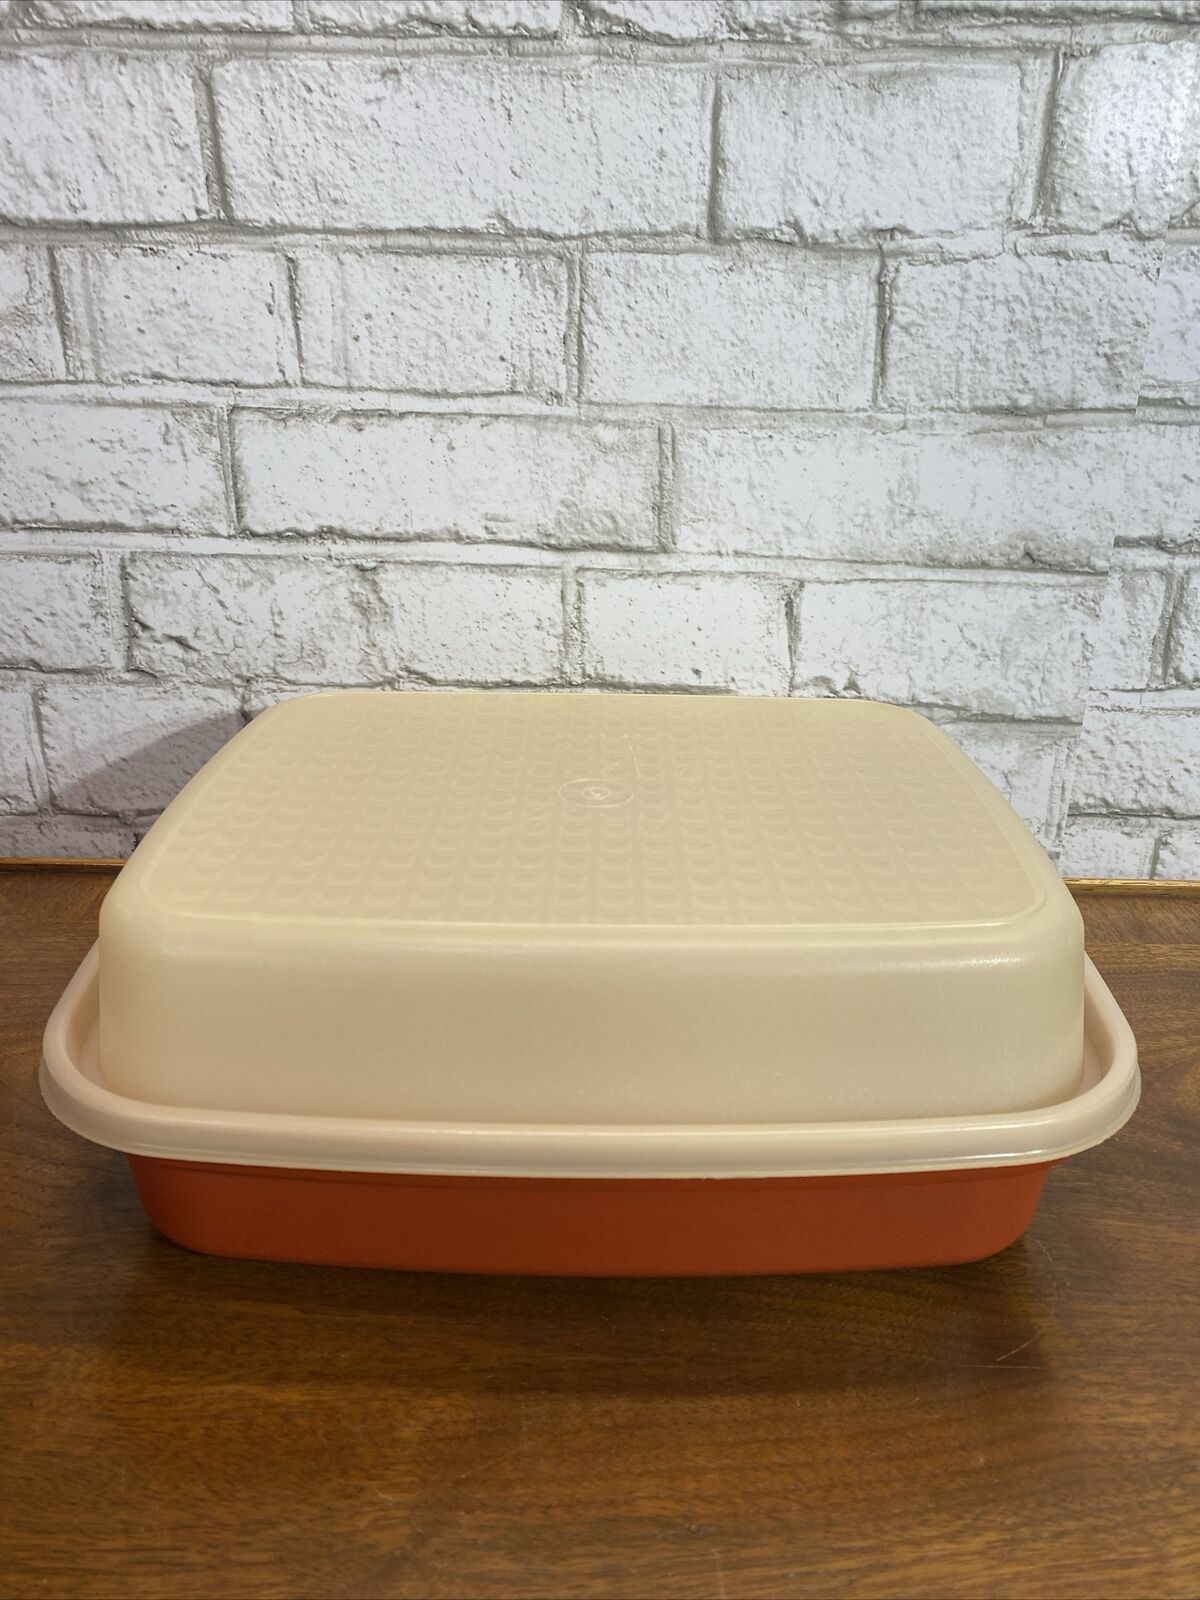 Vintage Tupperware 1294-2 Meat Marinade Keeper Container Paprika w/Lid 1295-2